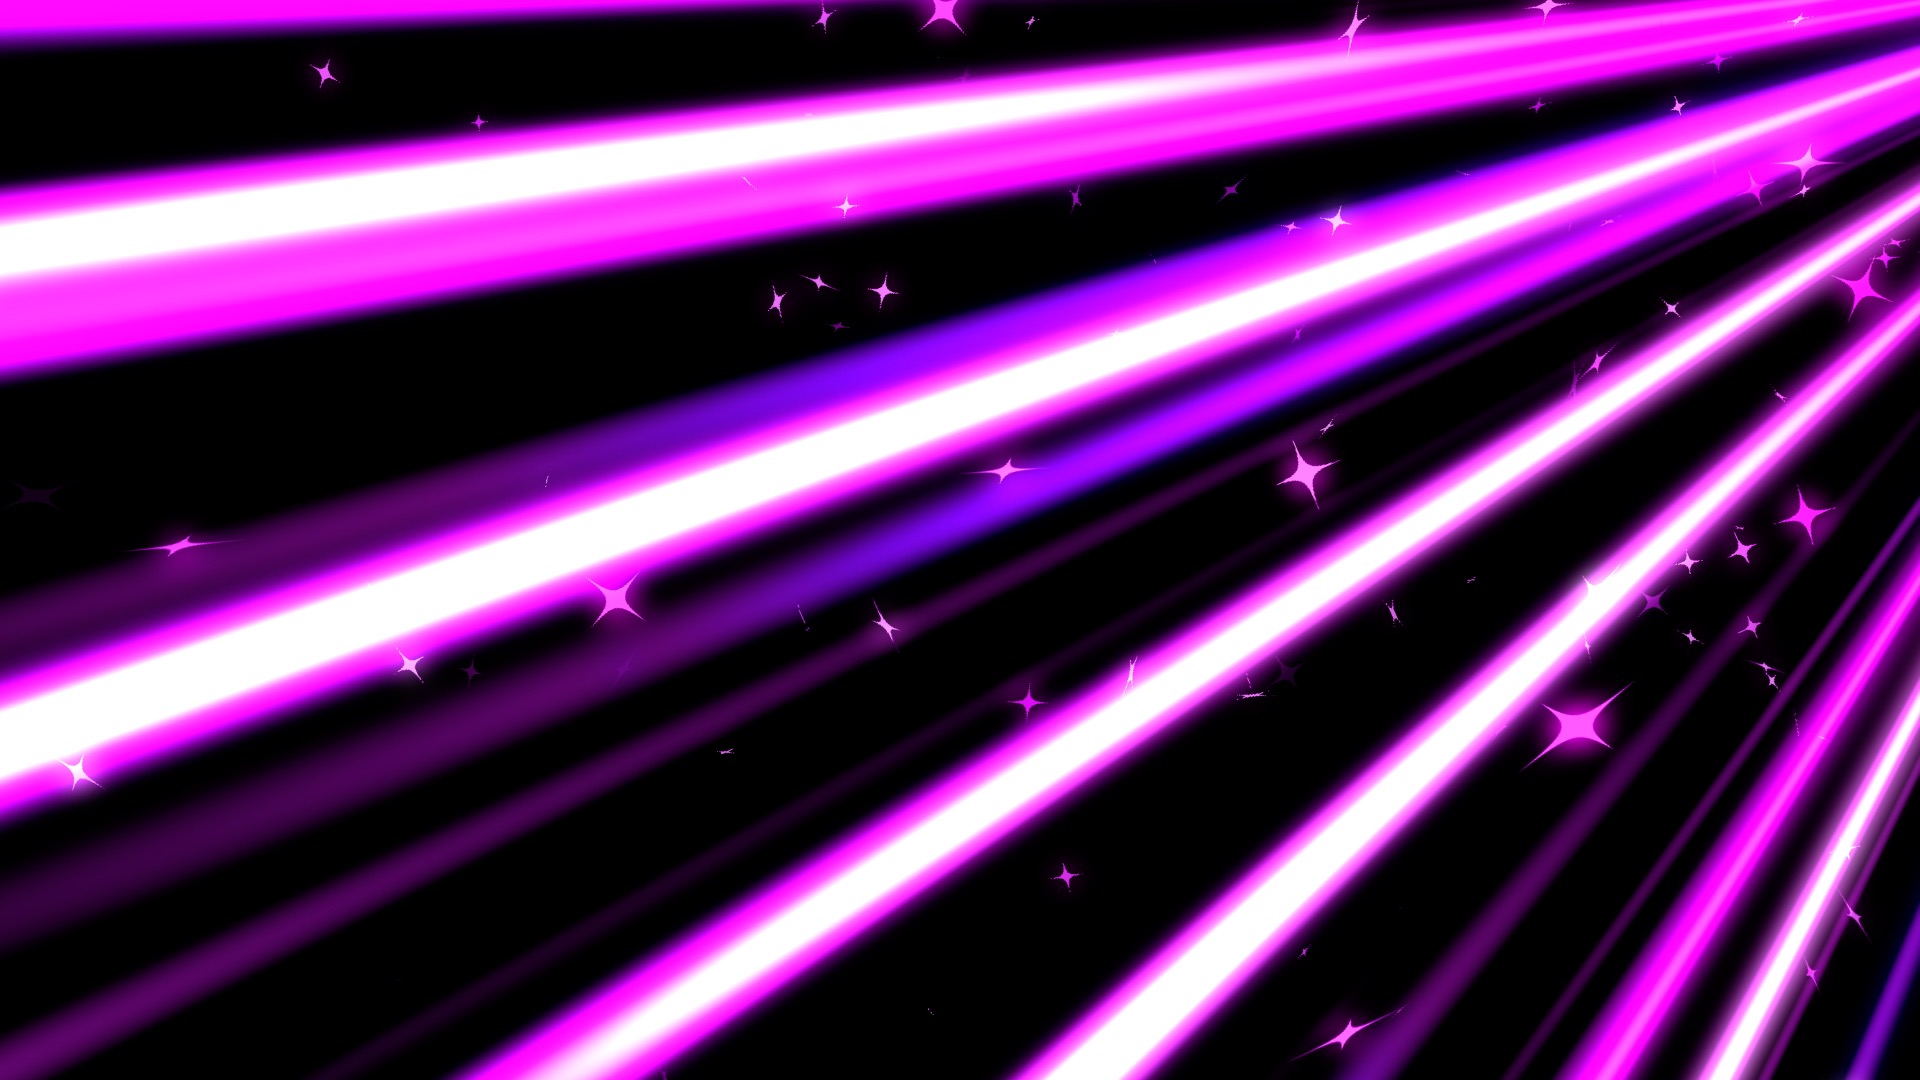 A colorful line of speedy and stars purple background loops